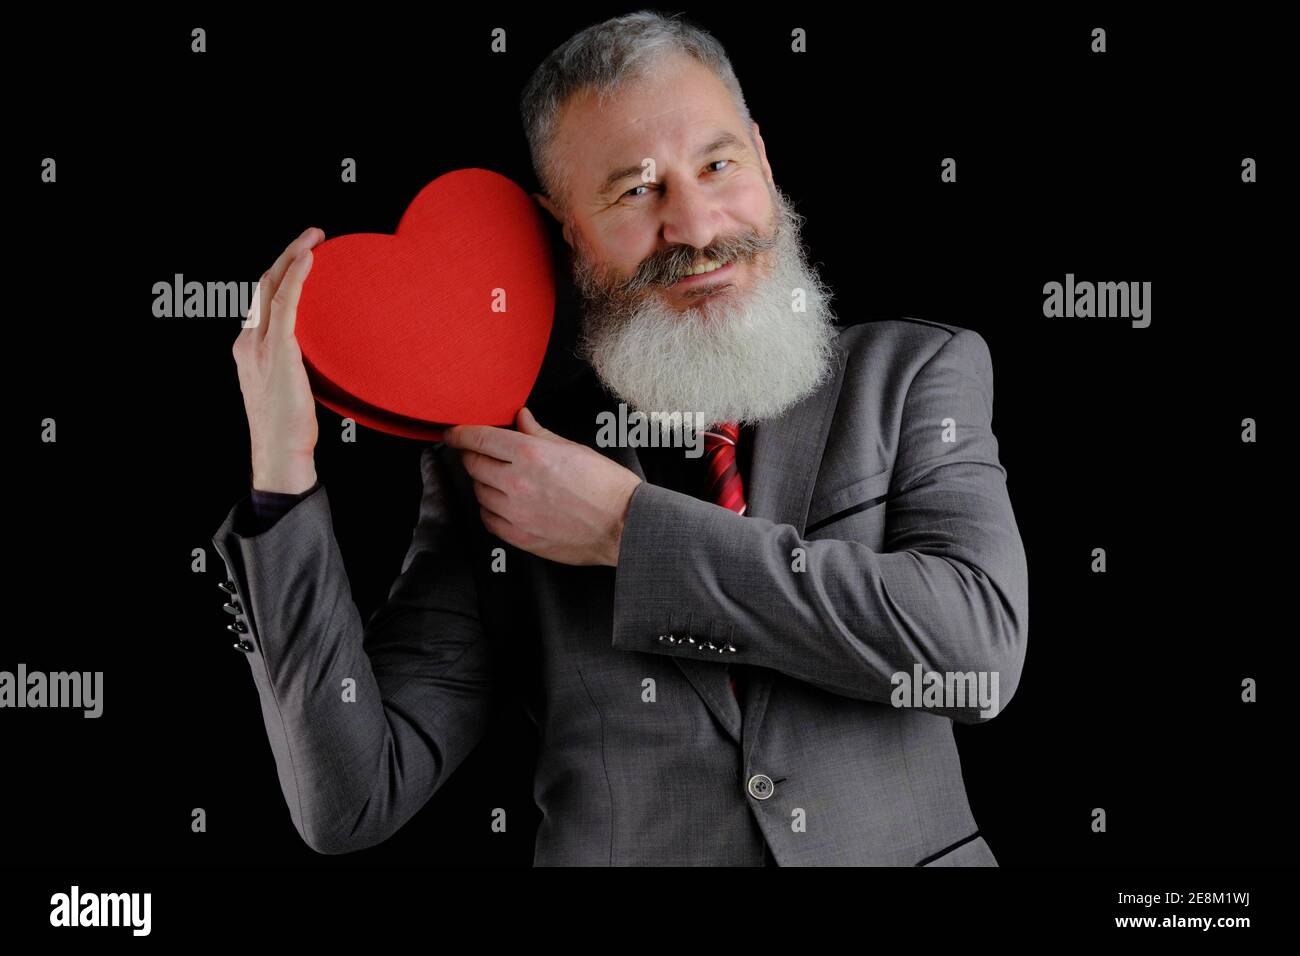 Mature bearded man wear gray suit holds red heart shaped gift box, isolated black background Stock Photo